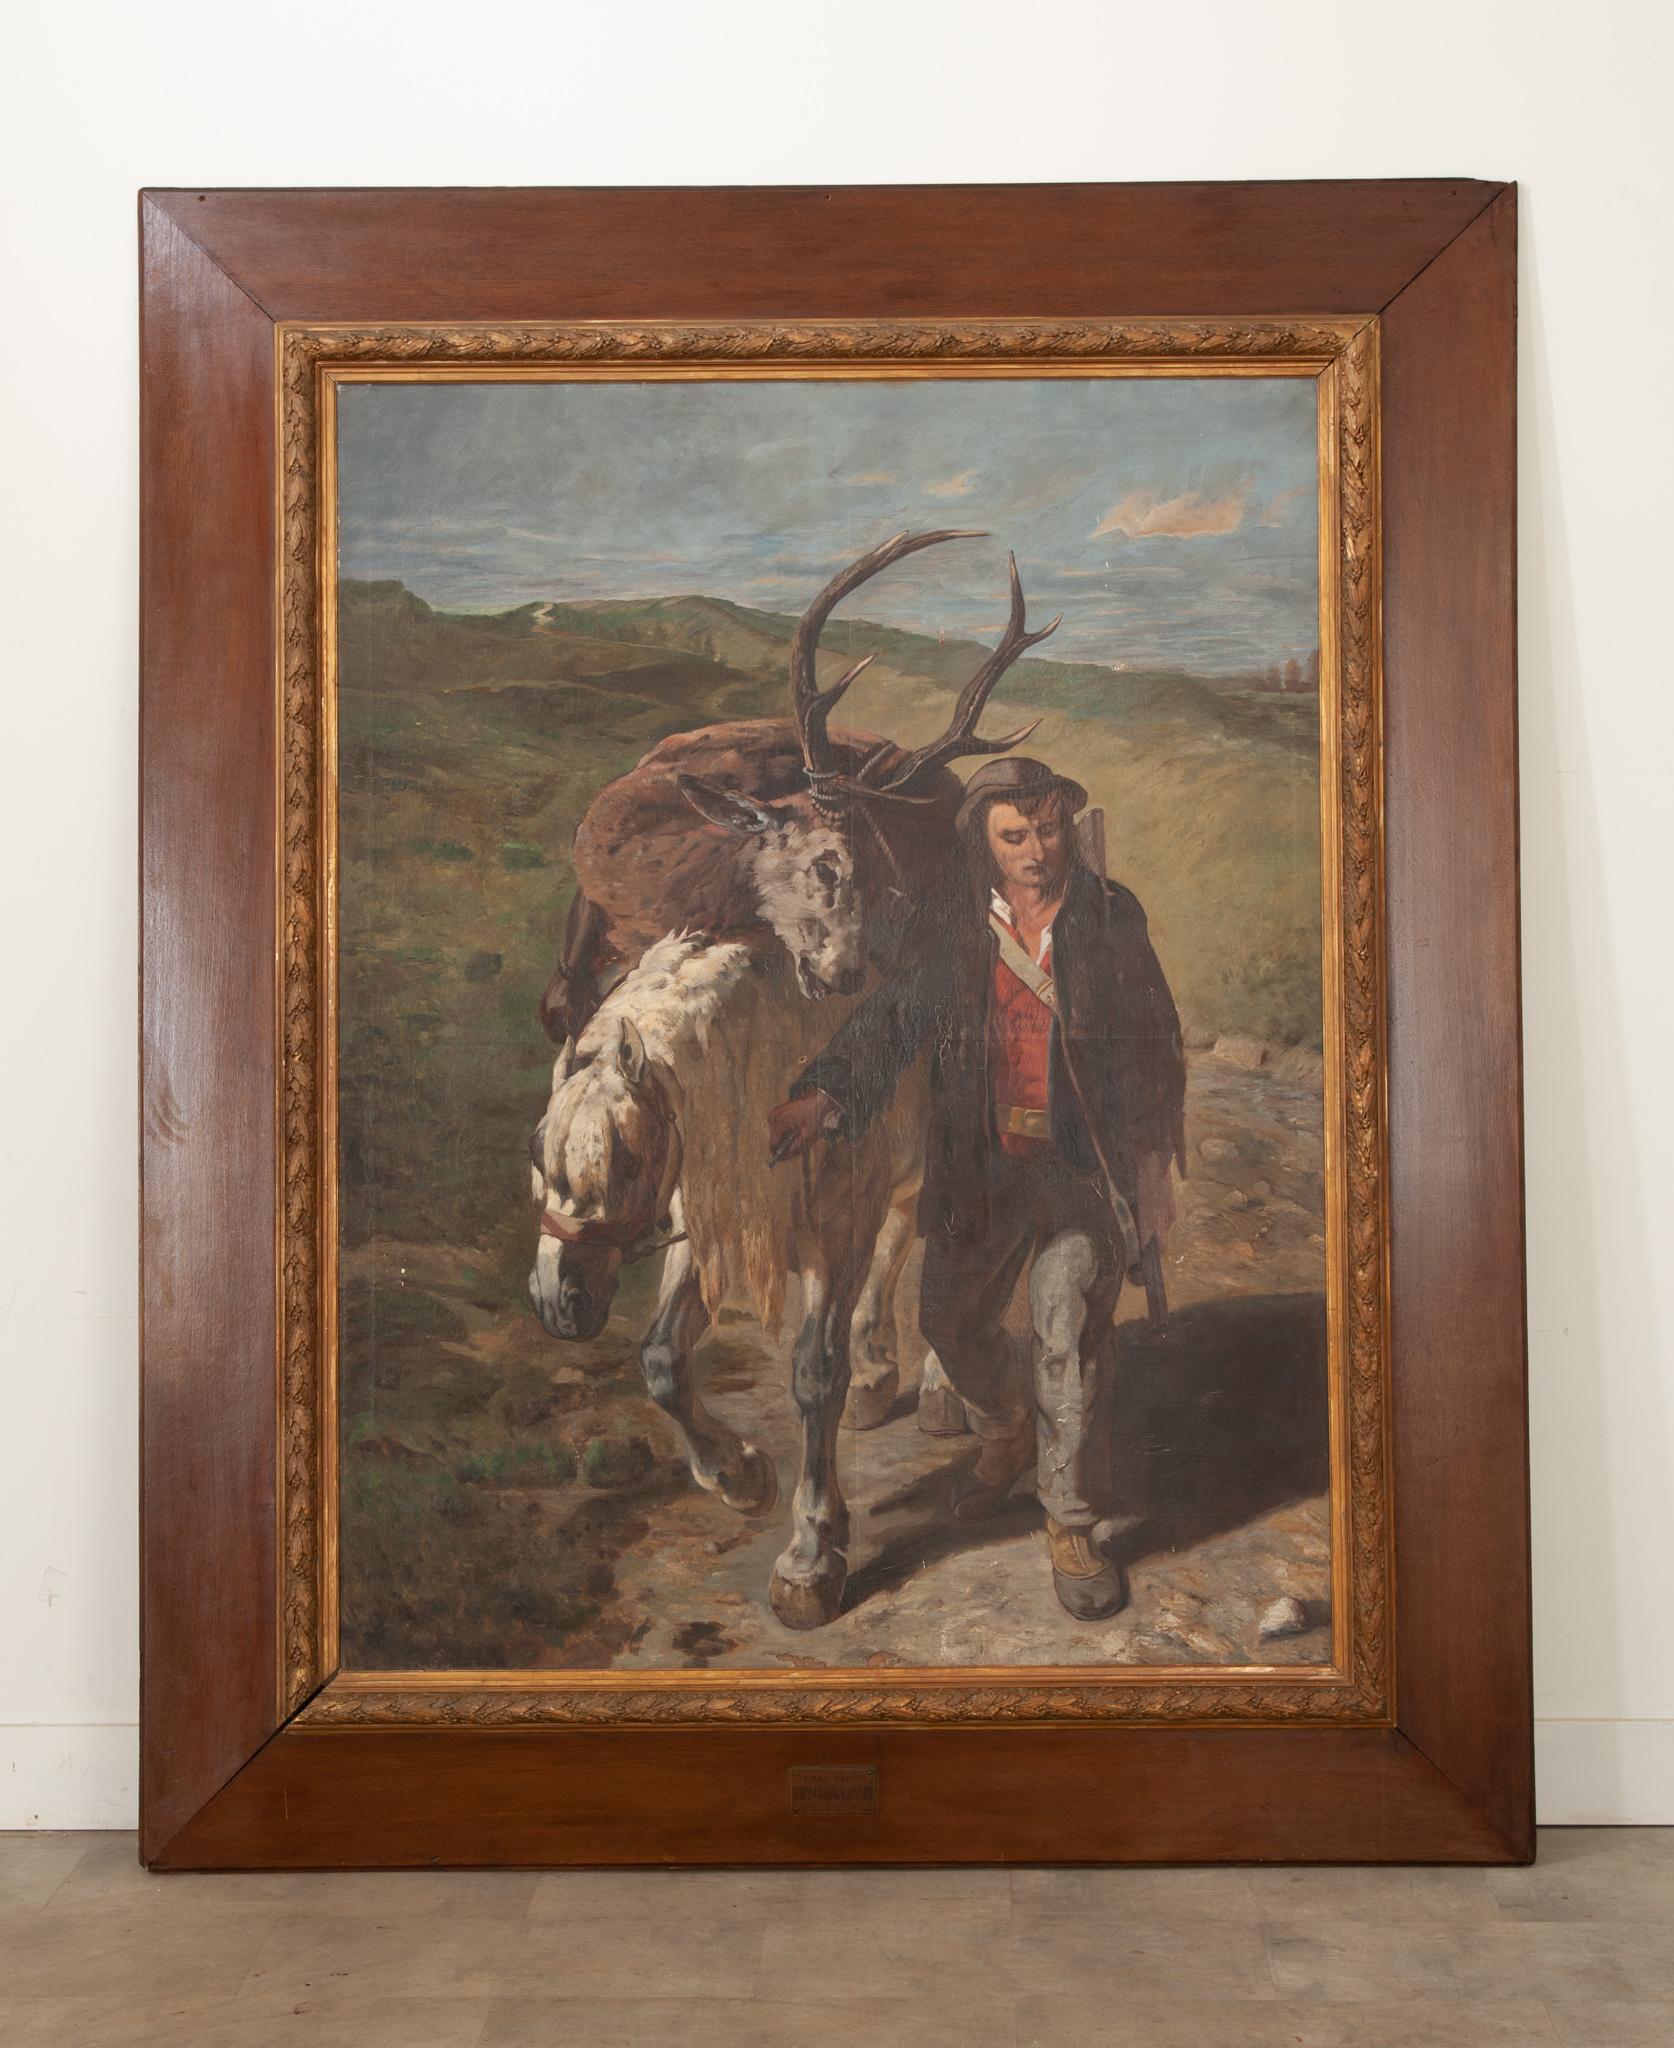 A massive gilt and mahogany frame houses this wonderful original oil on canvas depiction of a hunter returning from the hunt, with his taken stag being carried on horseback. With a somewhat exhausted look, the hunted, the hunter, and his horse